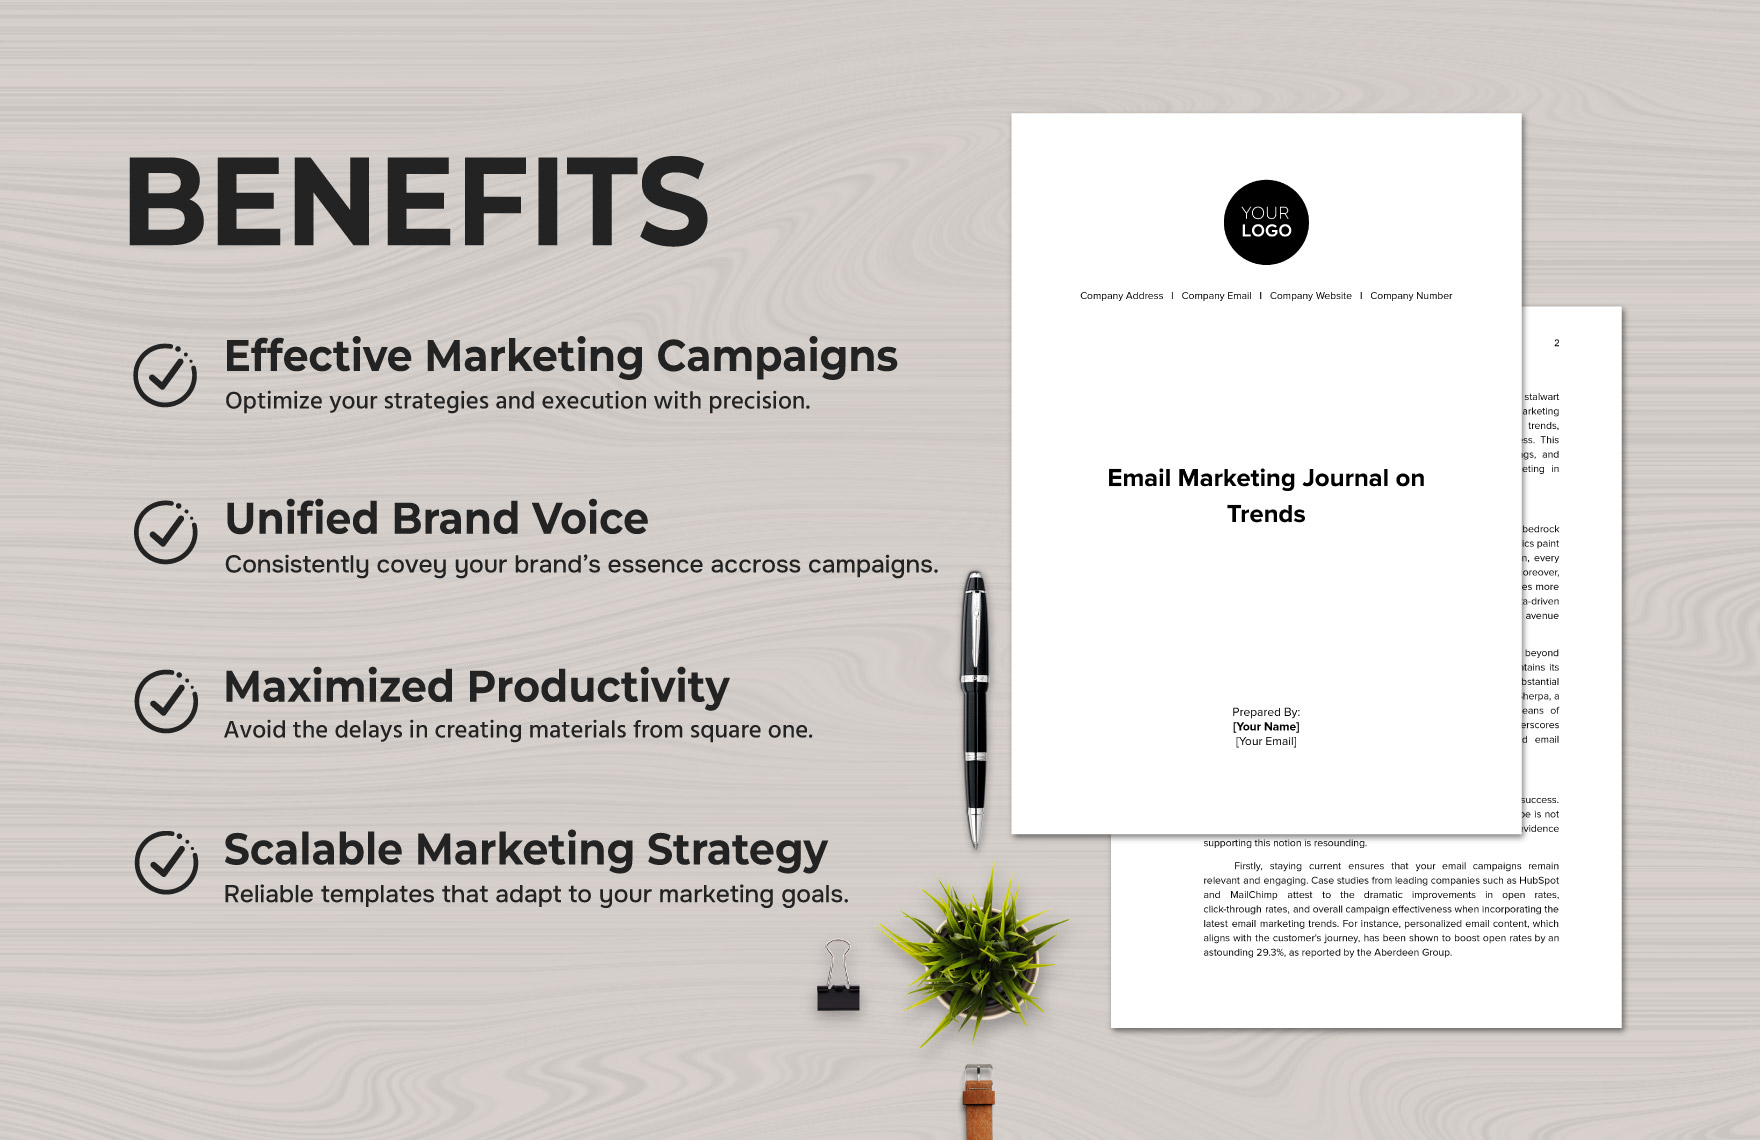 Email Marketing Journal on Trends Template